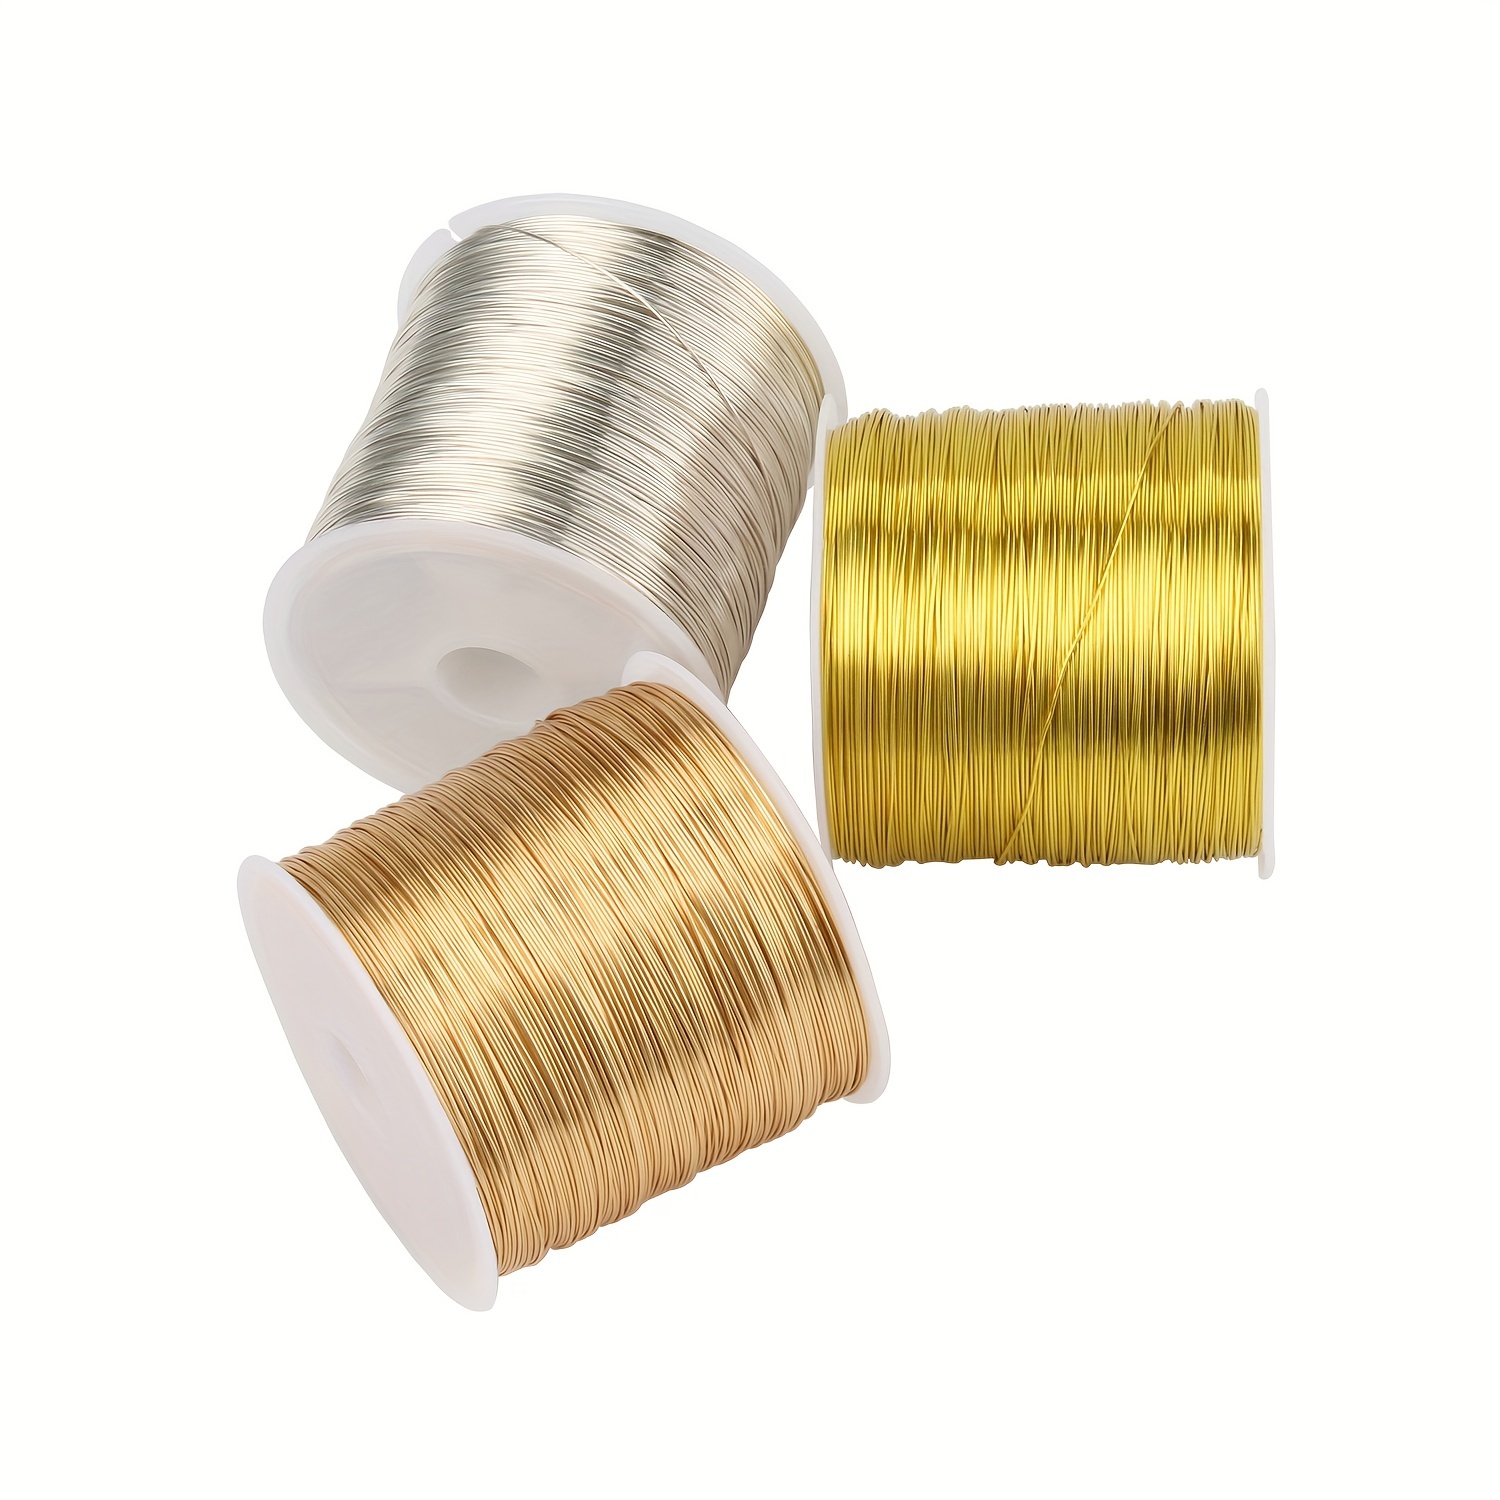 DIY Crafts Metal Wire 0.5mm Spool Soft String(Pack of 10pcs) - Metal Wire  0.5mm Spool Soft String(Pack of 10pcs) . shop for DIY Crafts products in  India.